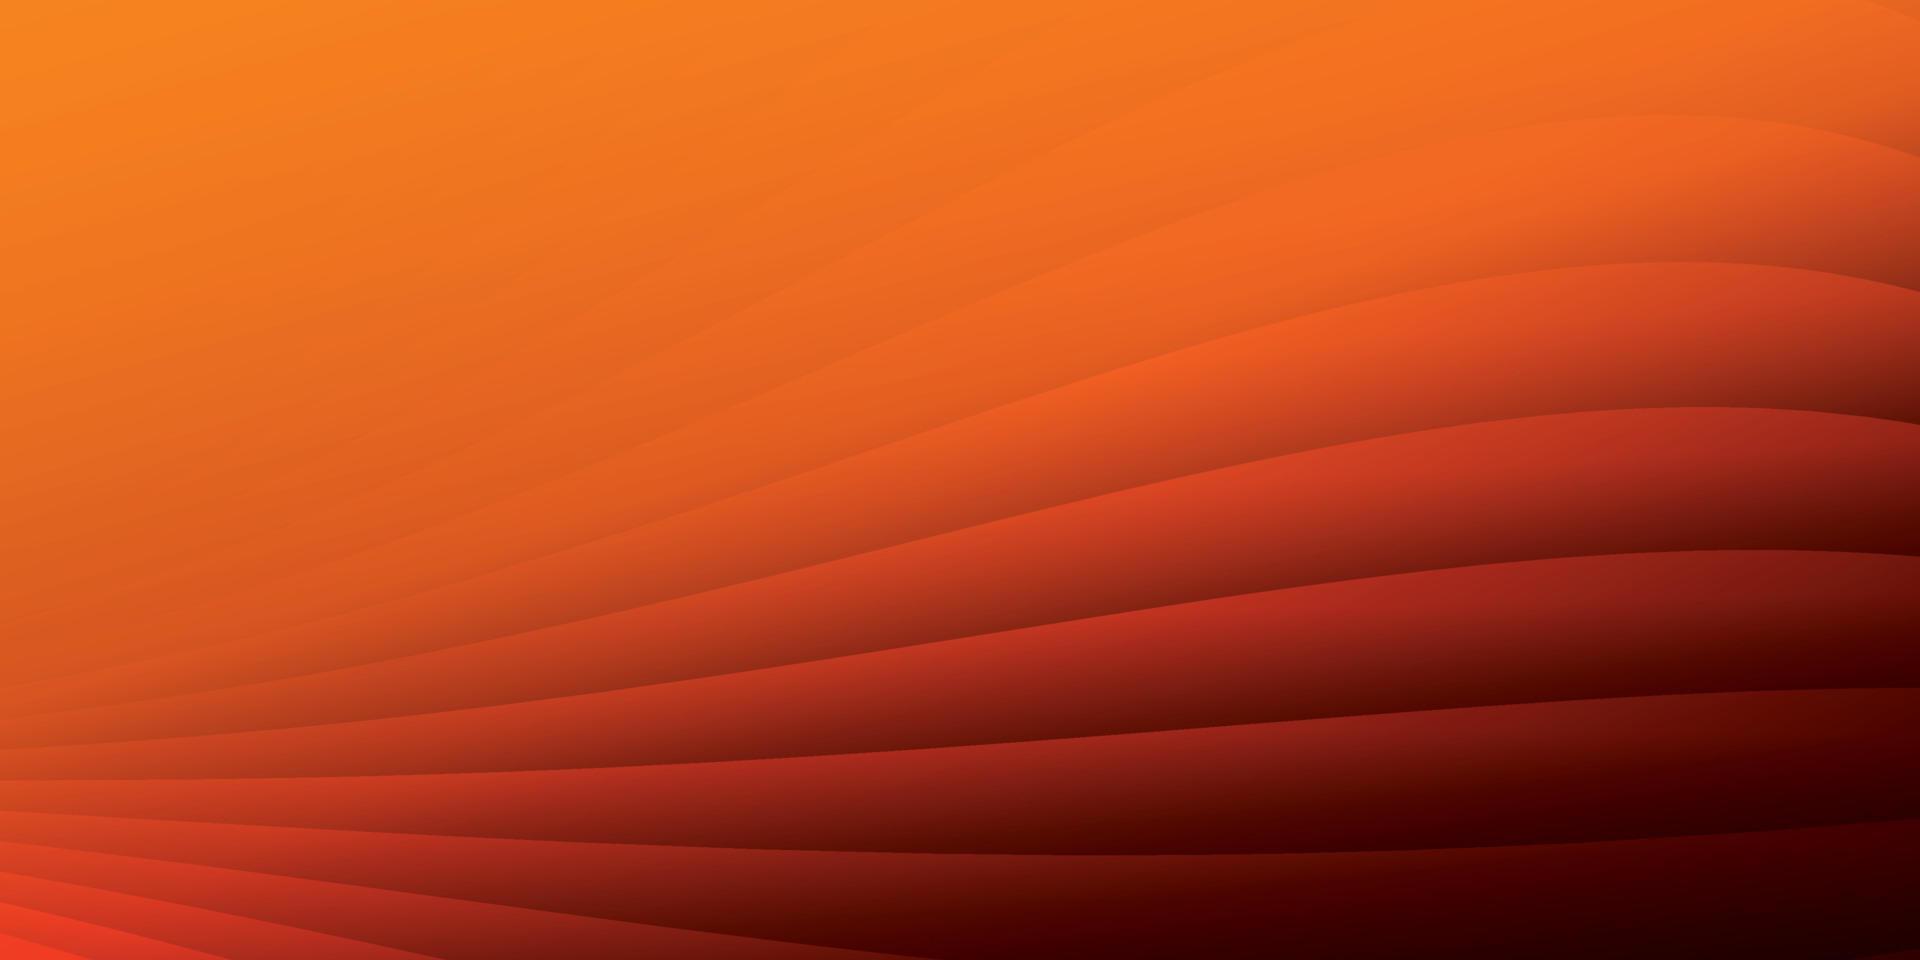 Abstract orange color background with geometric round shape. Vector illustration.